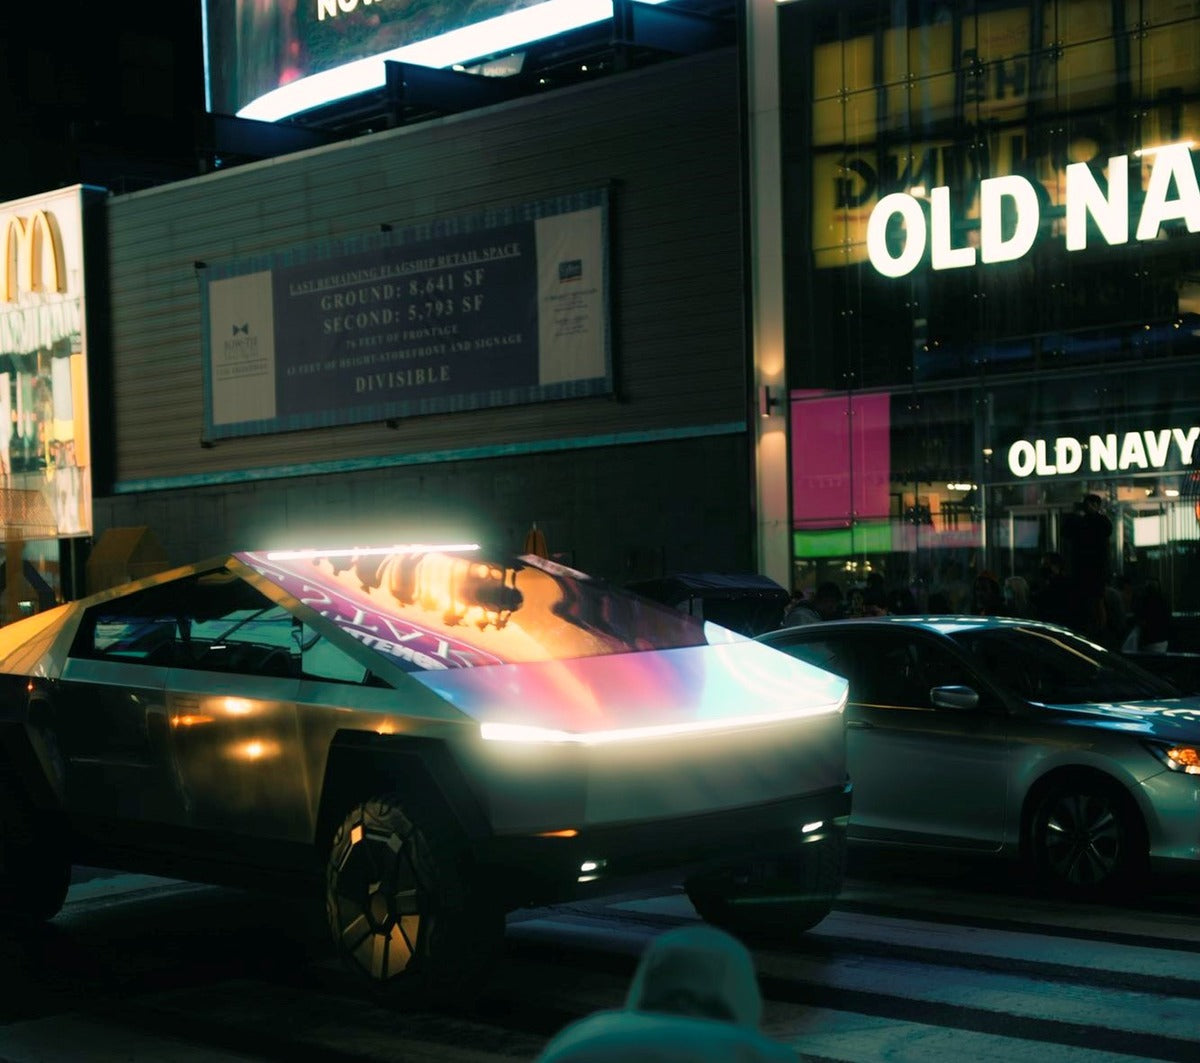 Cybertruck Turns NYC into Cyberpunk 2077, Setting Stage for Tesla CEO Elon Musk’s SNL Performance